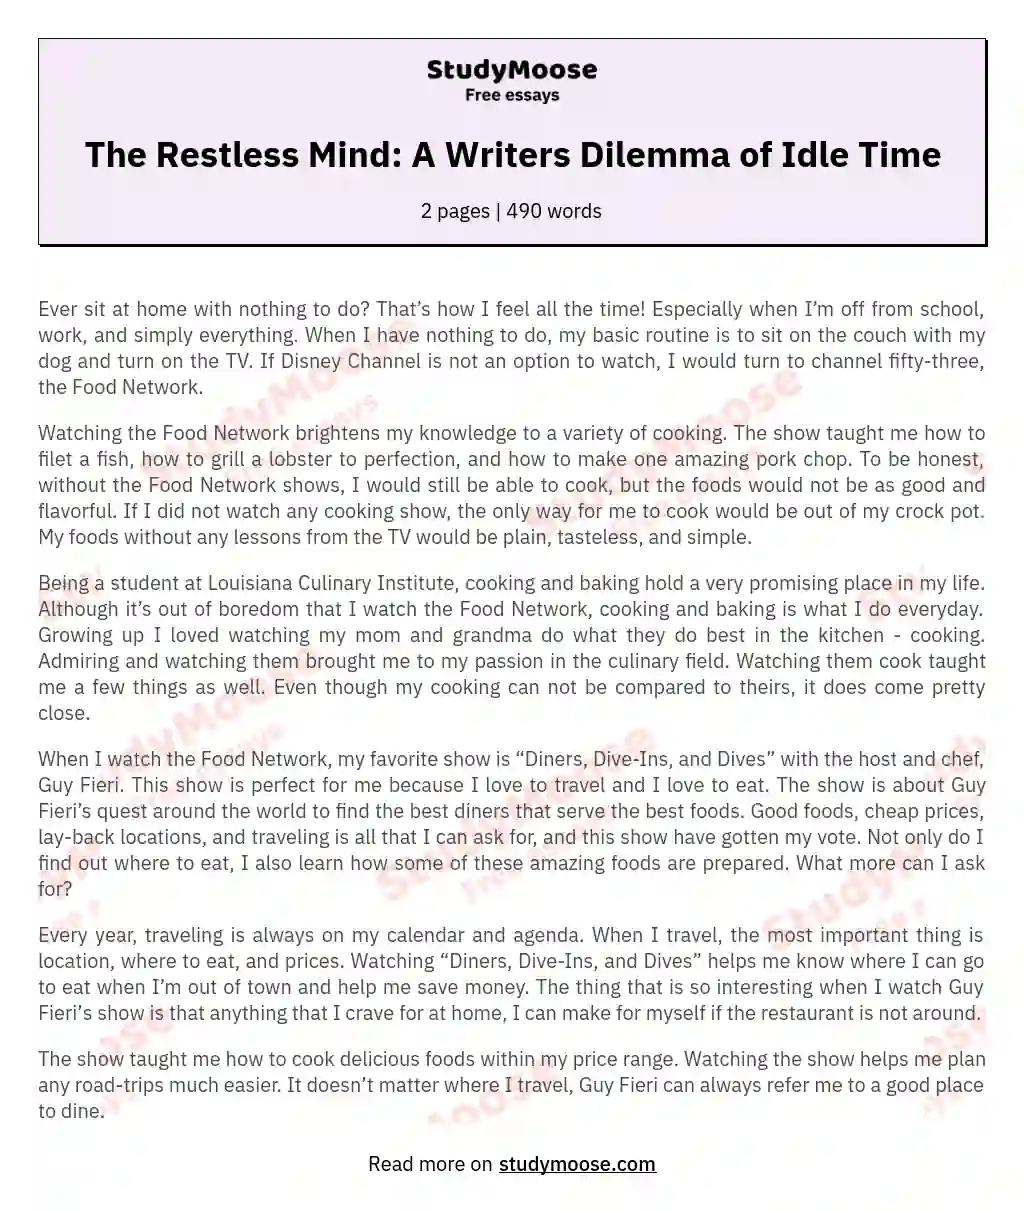 The Restless Mind: A Writers Dilemma of Idle Time essay